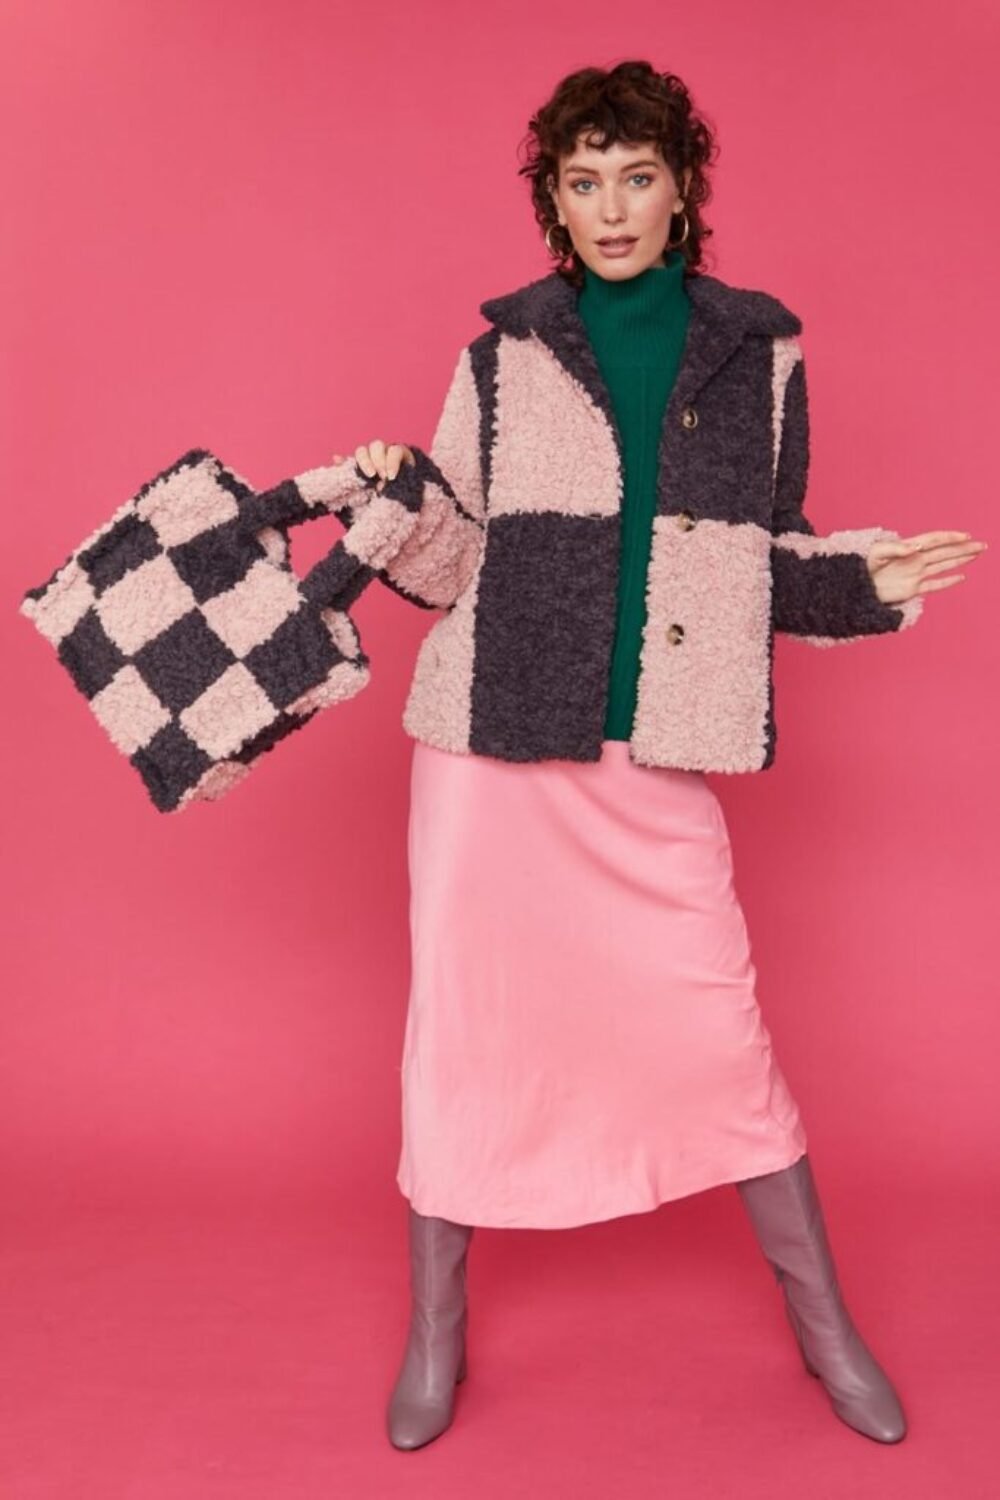 Shop Lux Checkered Pink and Purple Faux Shearling Cropped Coat and women's luxury and designer clothes at www.lux-apparel.co.uk